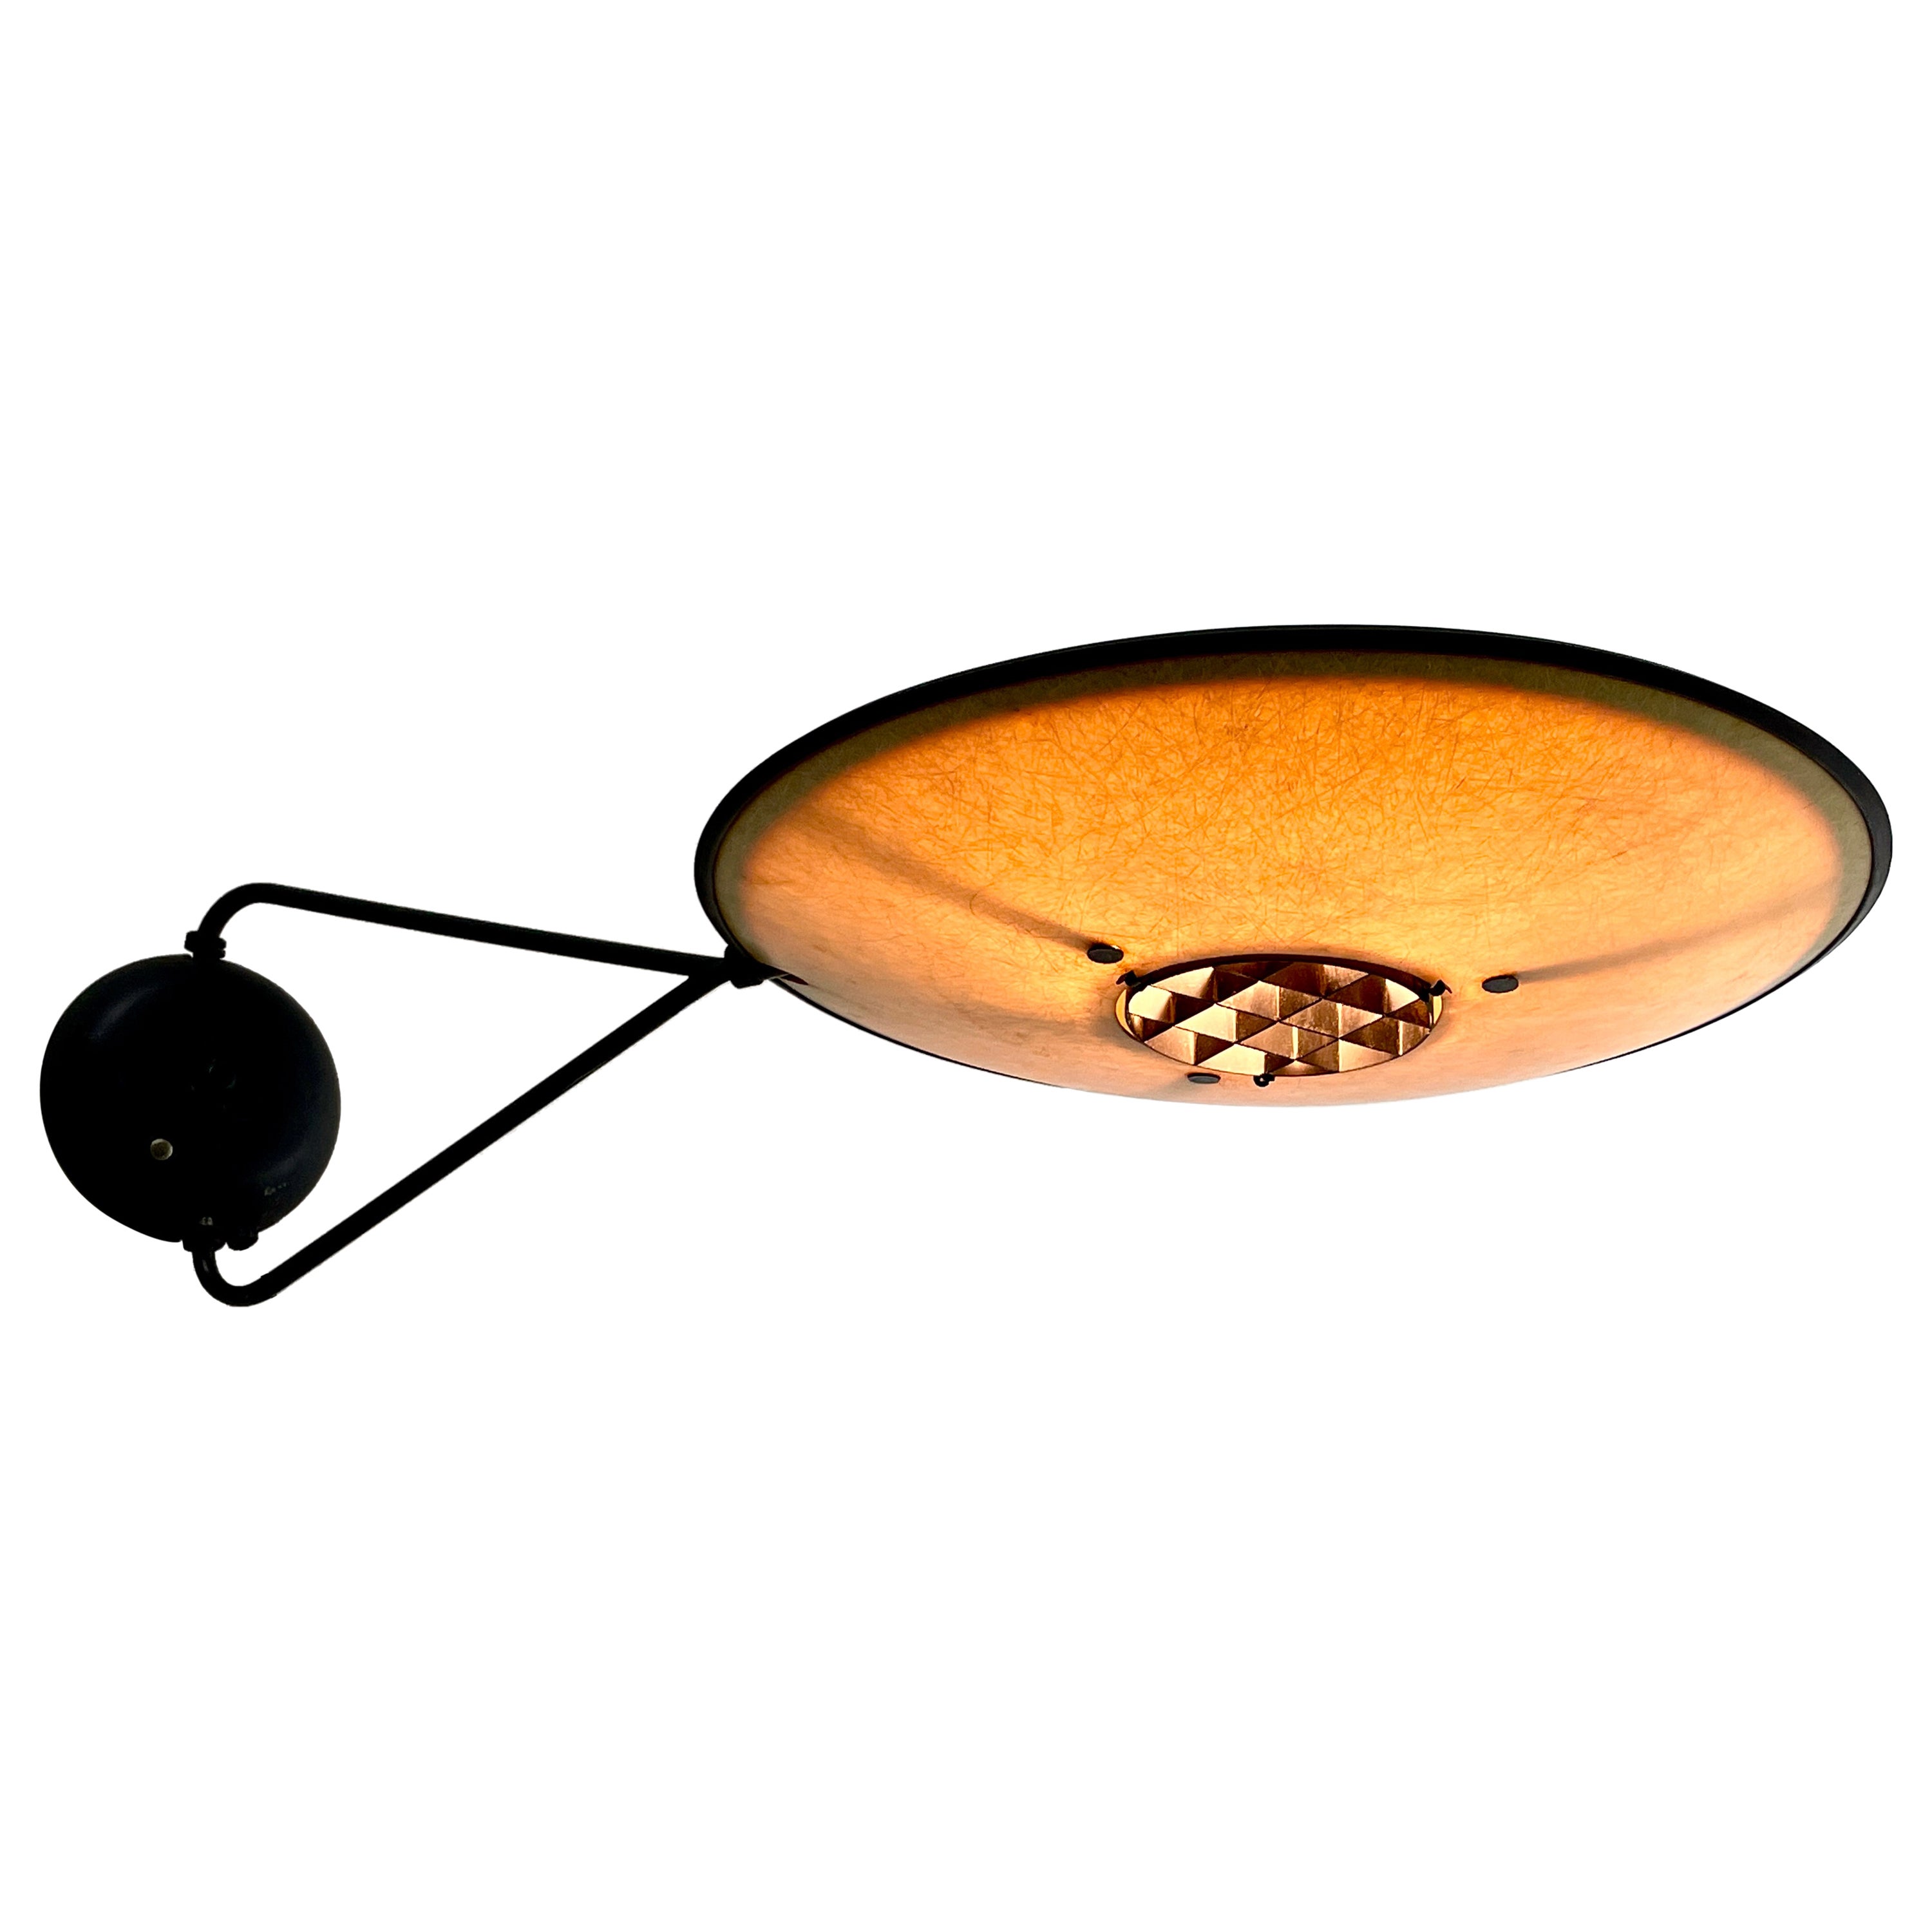 Mitchell Bobrick Controlight Wall Mount Articulating Saucer Sconce Lamp 1950s For Sale